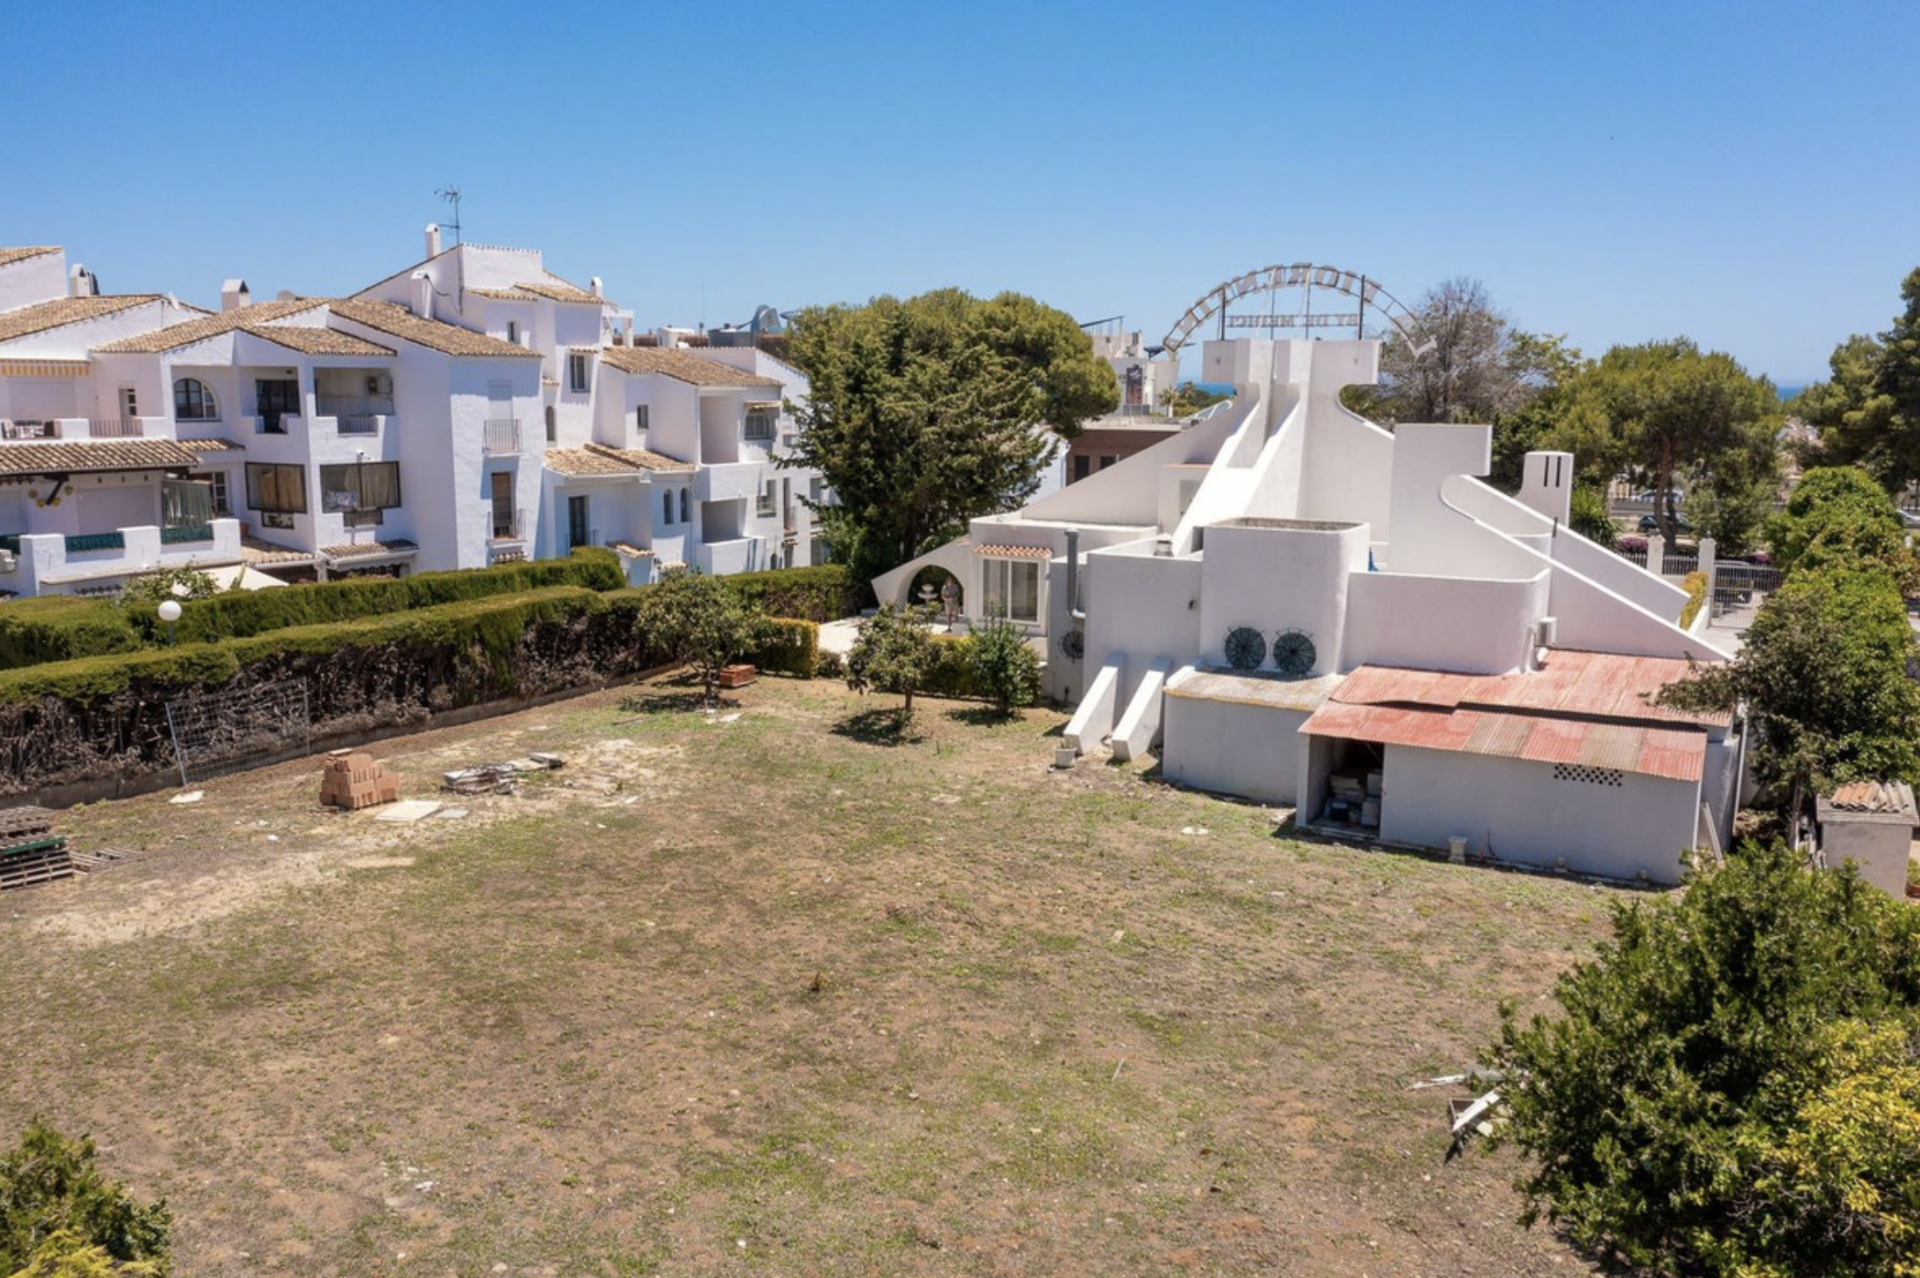 Commercial plot with great development potential in the area of El Pilar